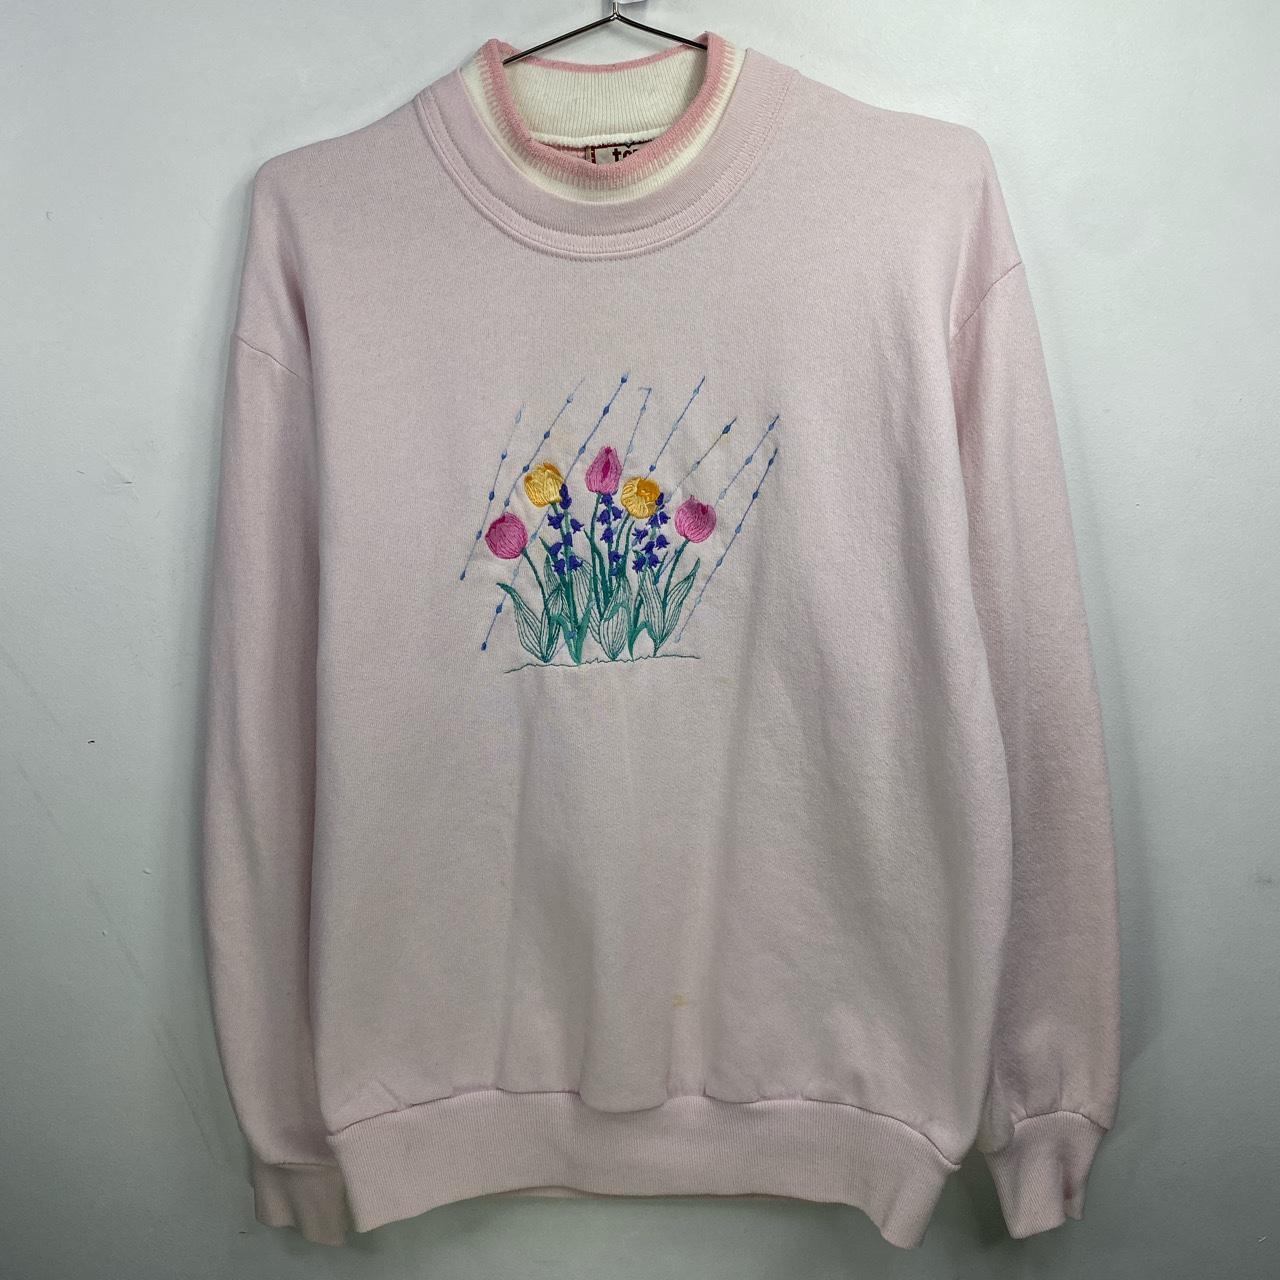 Product Image 1 - Vintage 90s embroidered tulip flowers